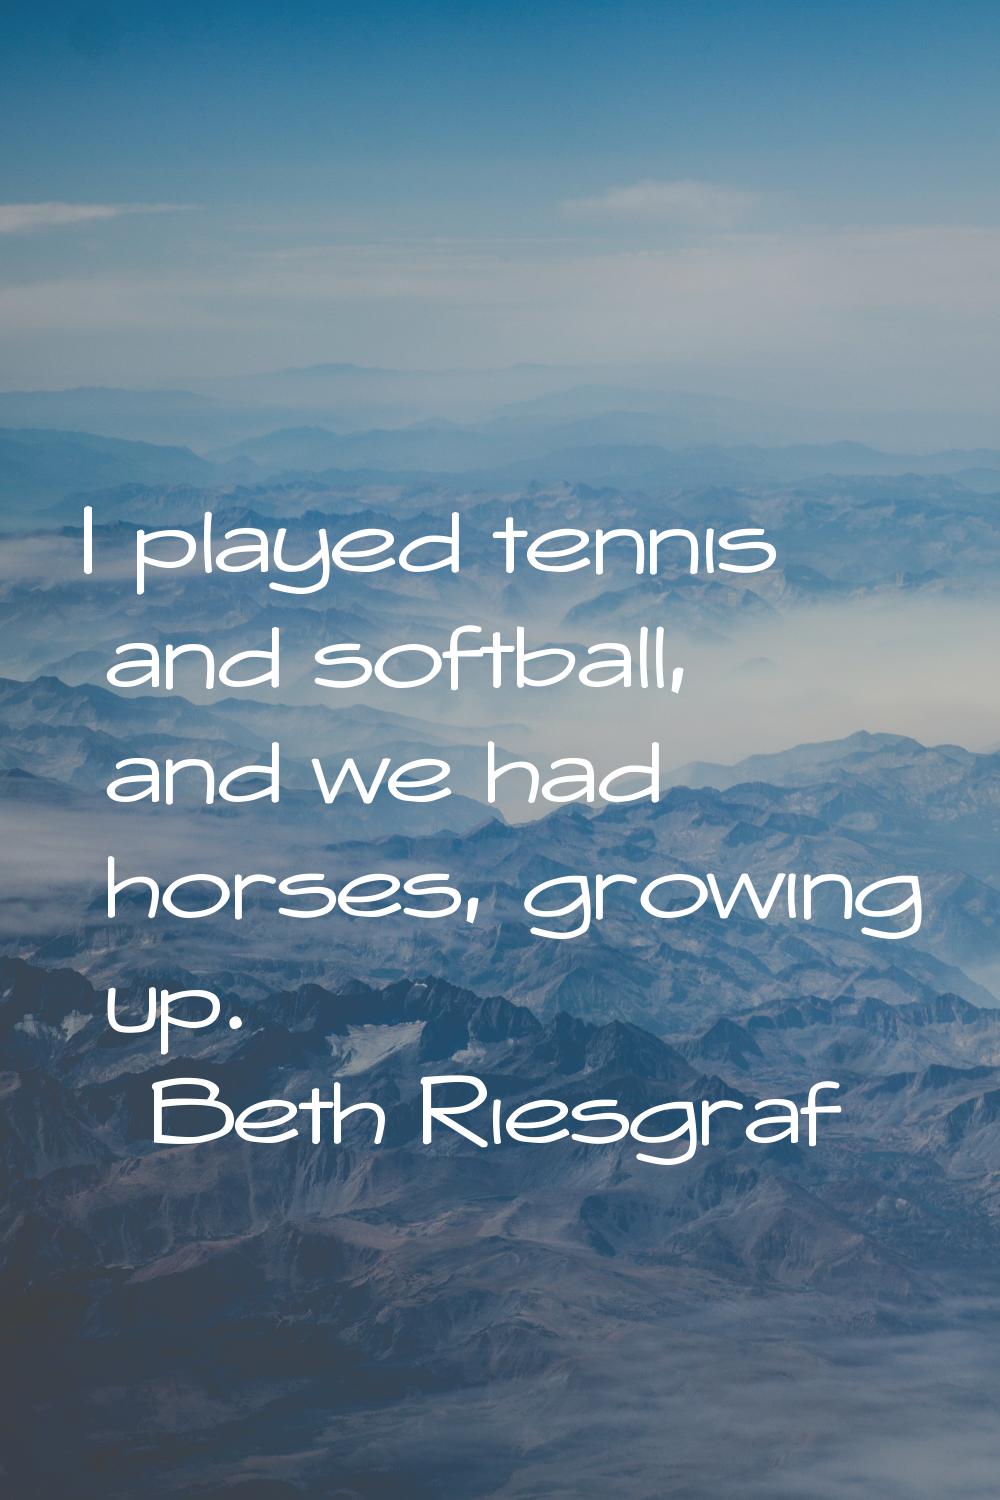 I played tennis and softball, and we had horses, growing up.